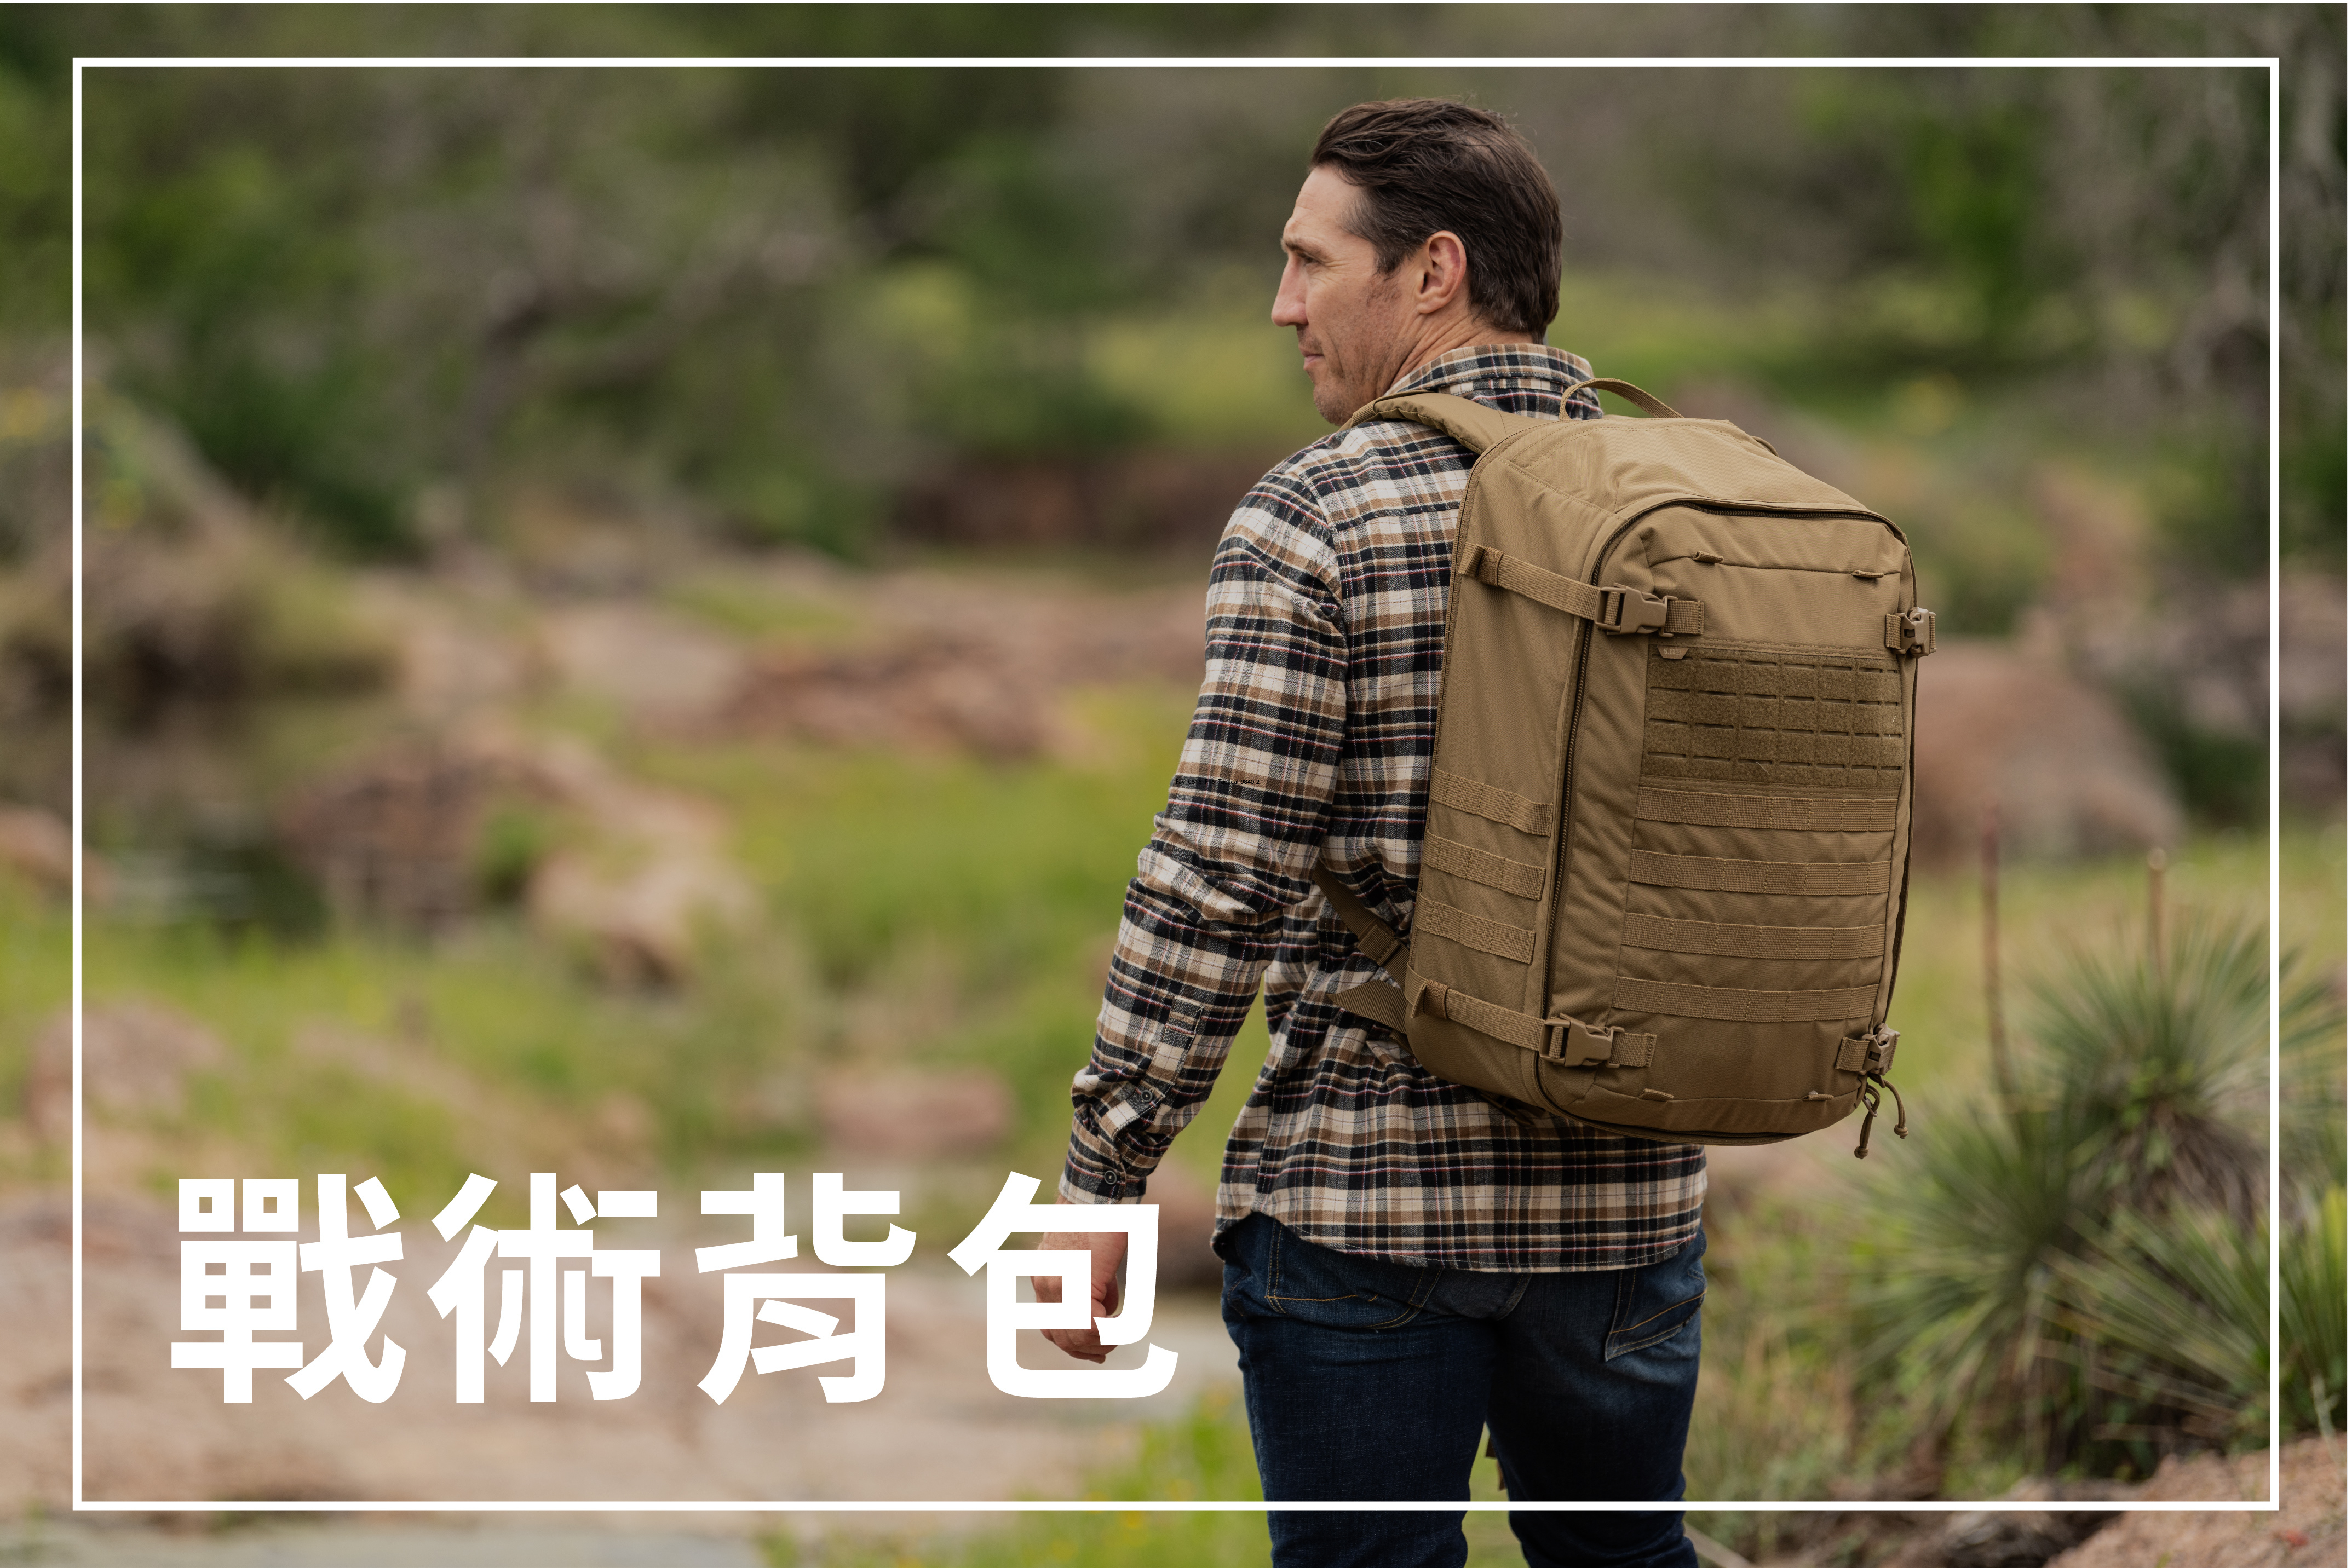 5.11 Tactical LV Covert Carry Pack 45L - Backpacks